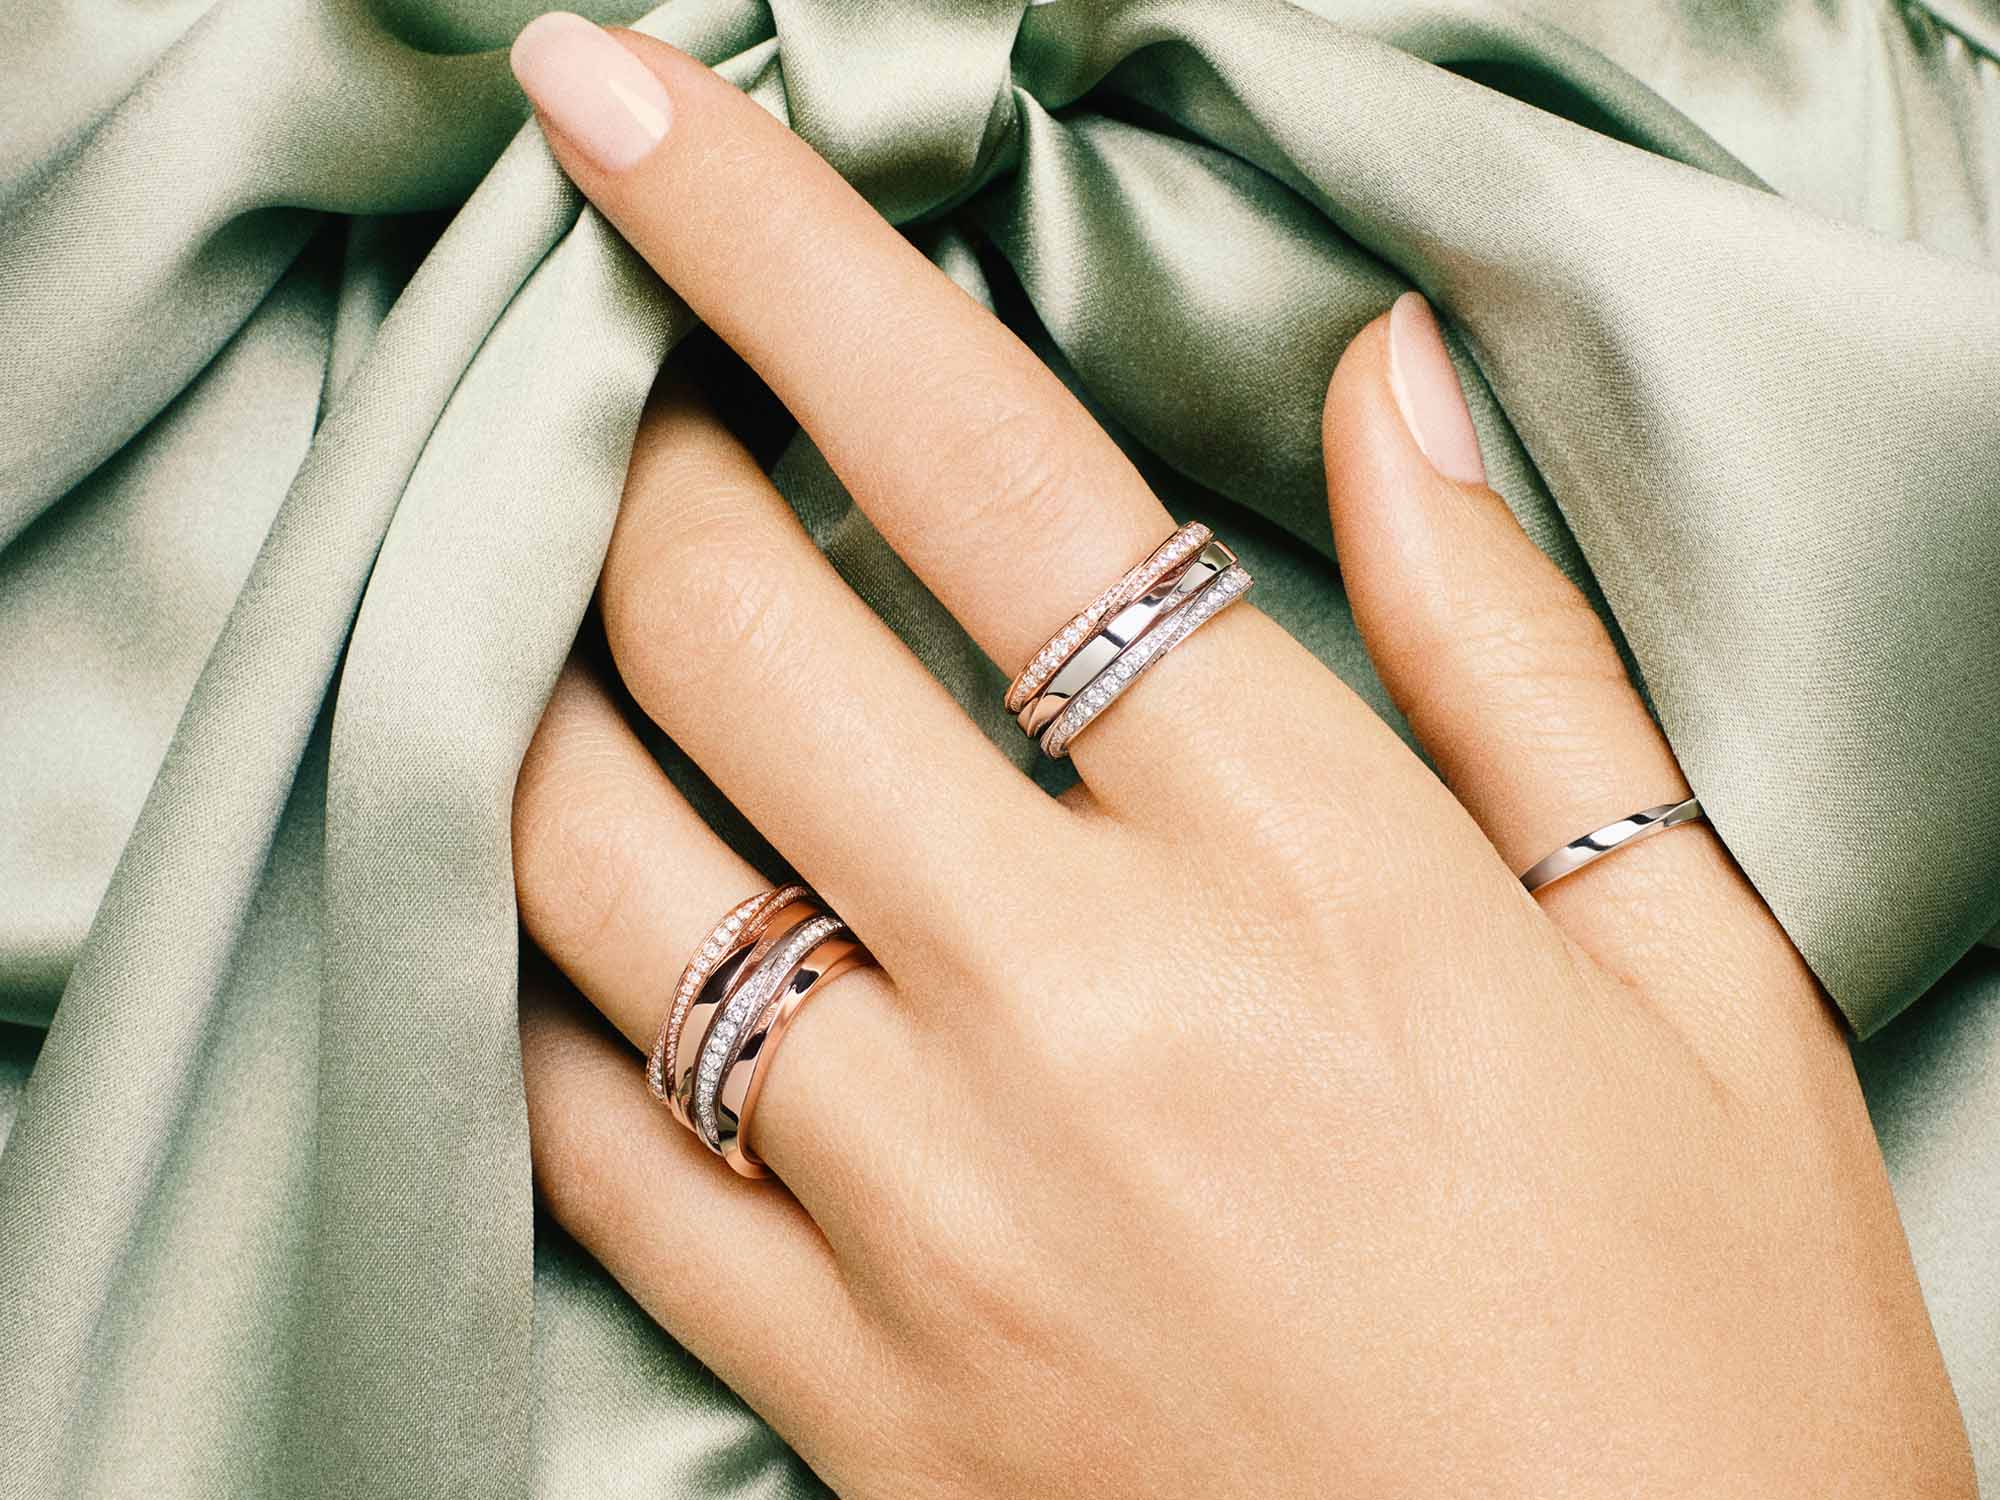 Model's hand with Spiral Pavé Diamond Band and Spiral Band from the Graff Spiral Jewellery Collection